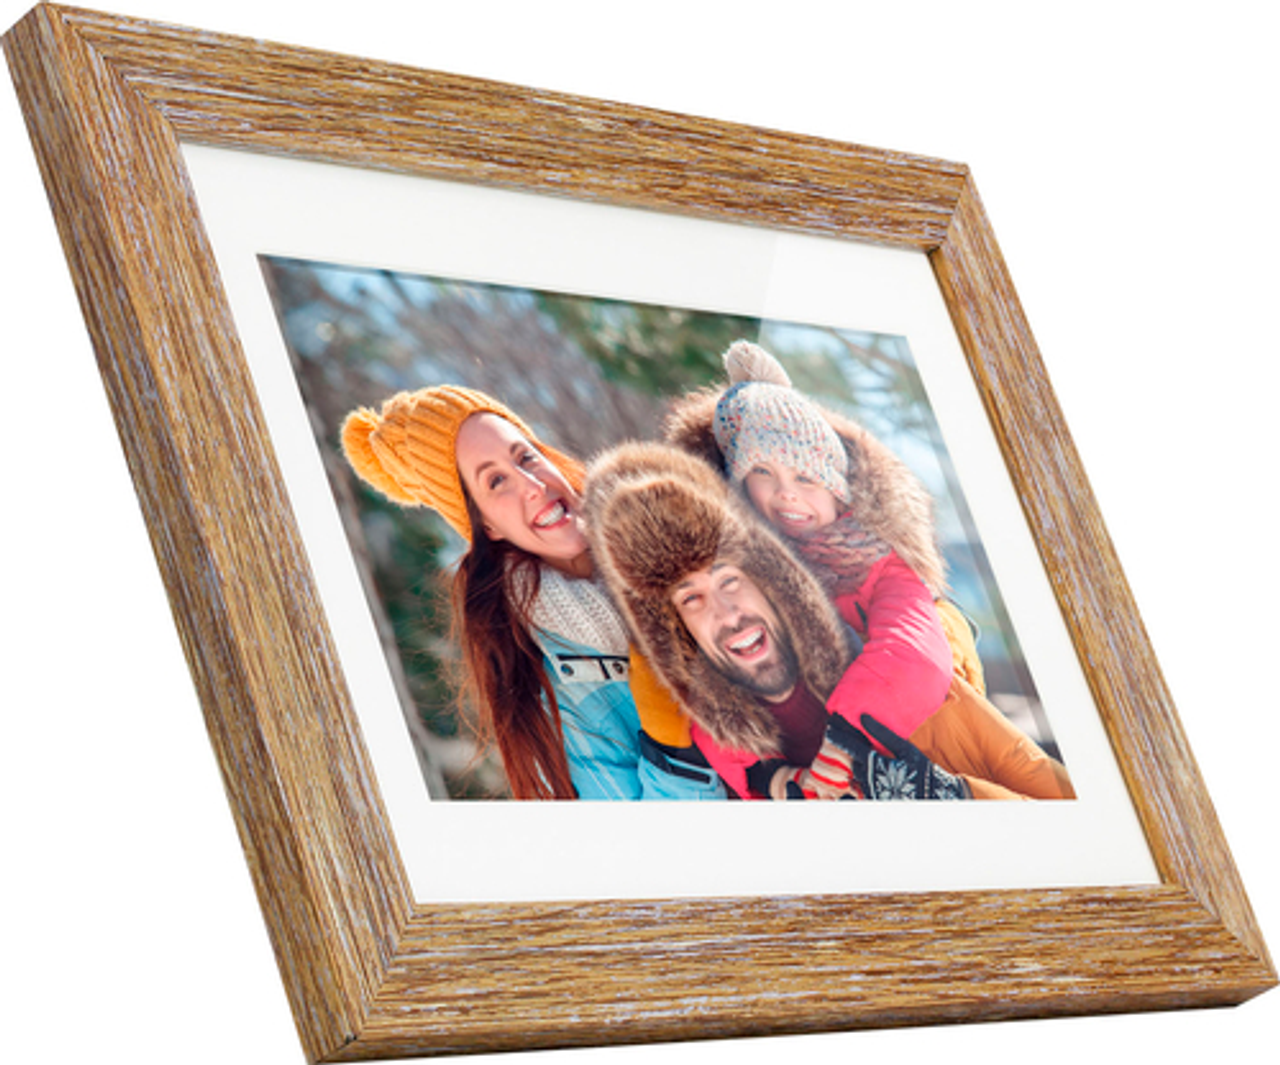 Aluratek - 10" WiFi LCD Touchscreen Distressed Wood Digital Photo Frame with 16GB Memory - Wood